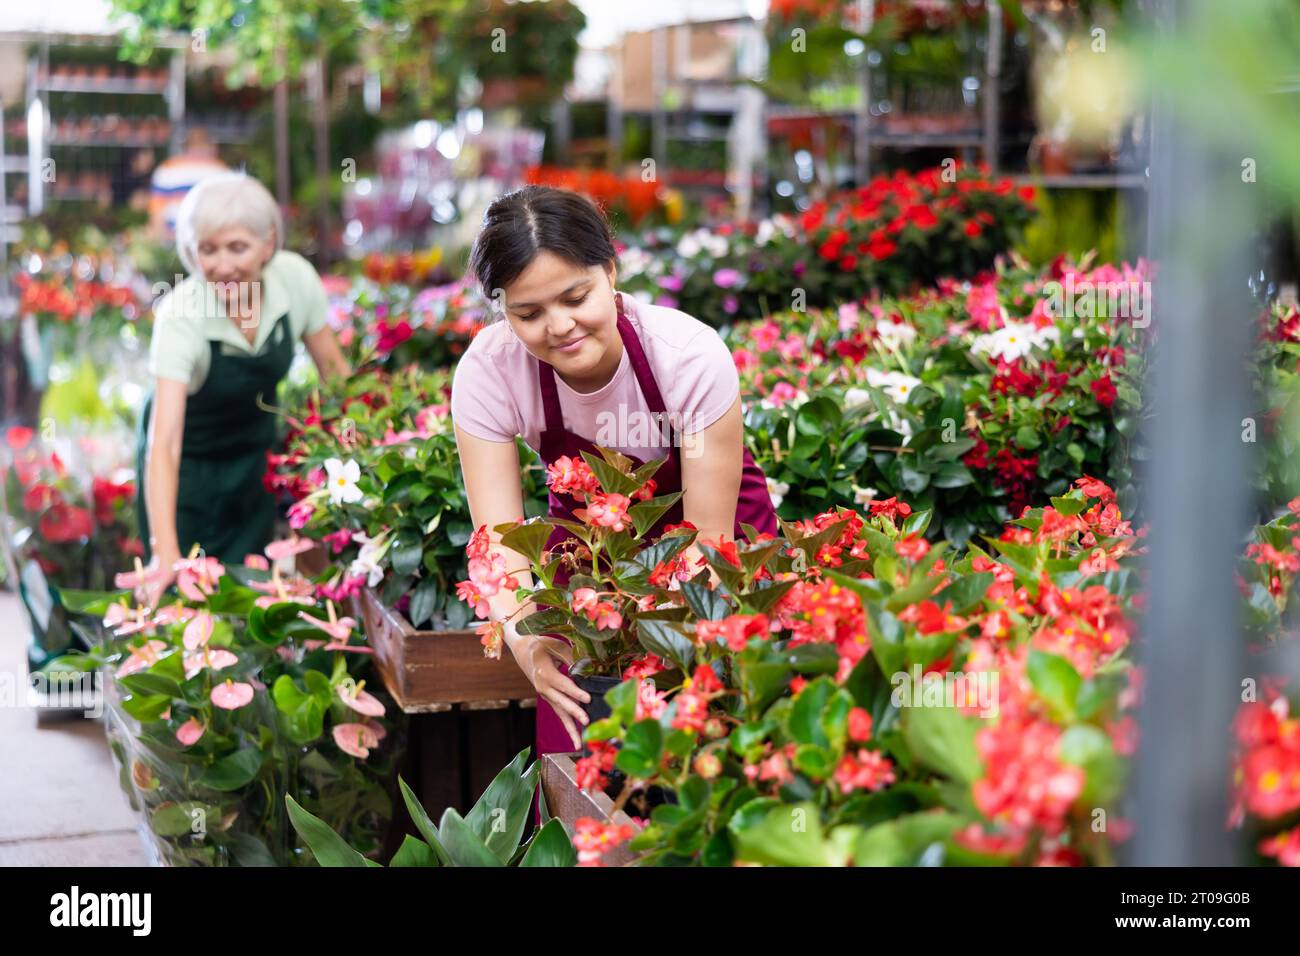 Middle-aged woman marketer looking at big begonias in point of sale of plants Stock Photo